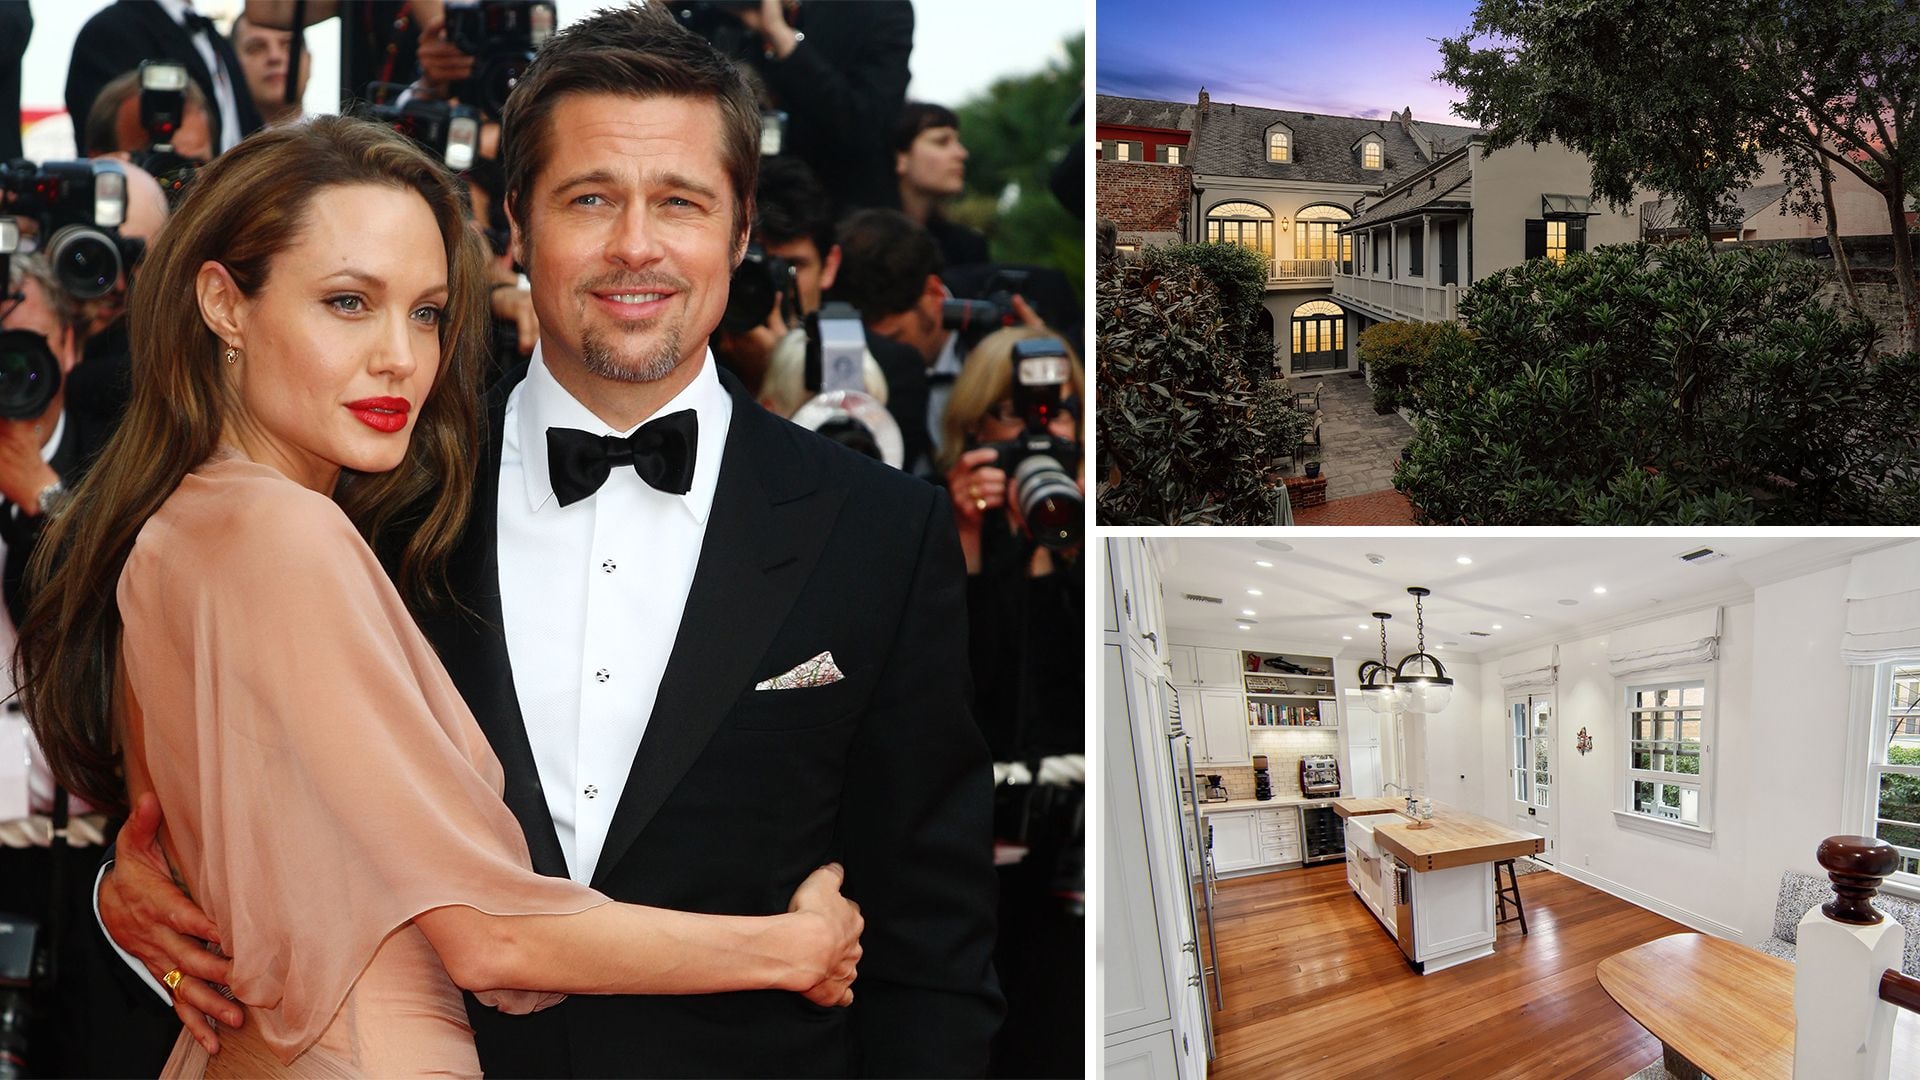 Brad and Angelina's New Orleans home is for sale